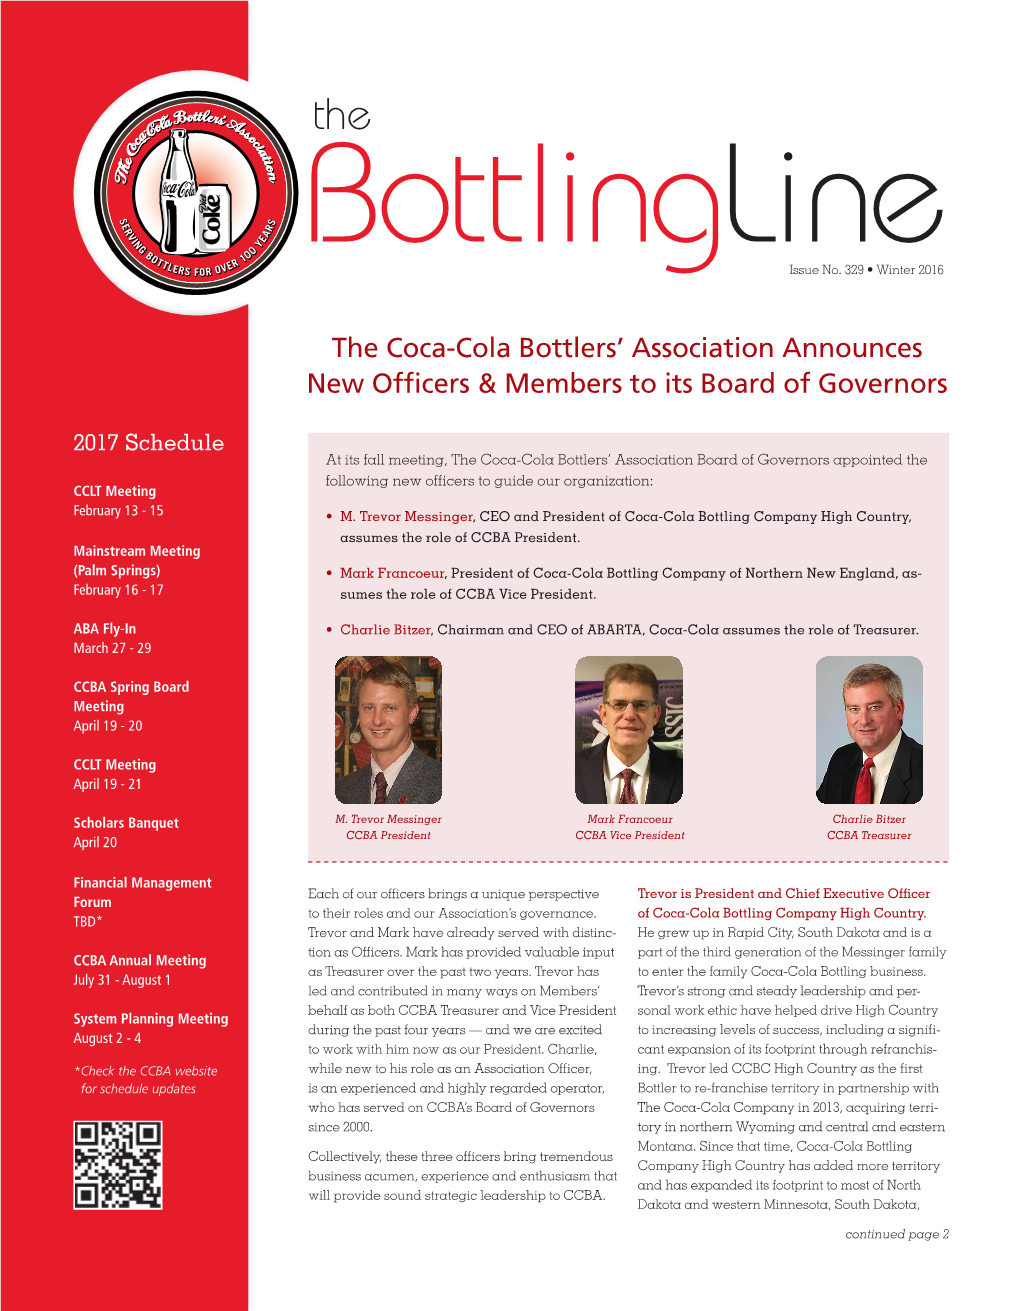 The Coca-Cola Bottlers' Association Announces New Officers